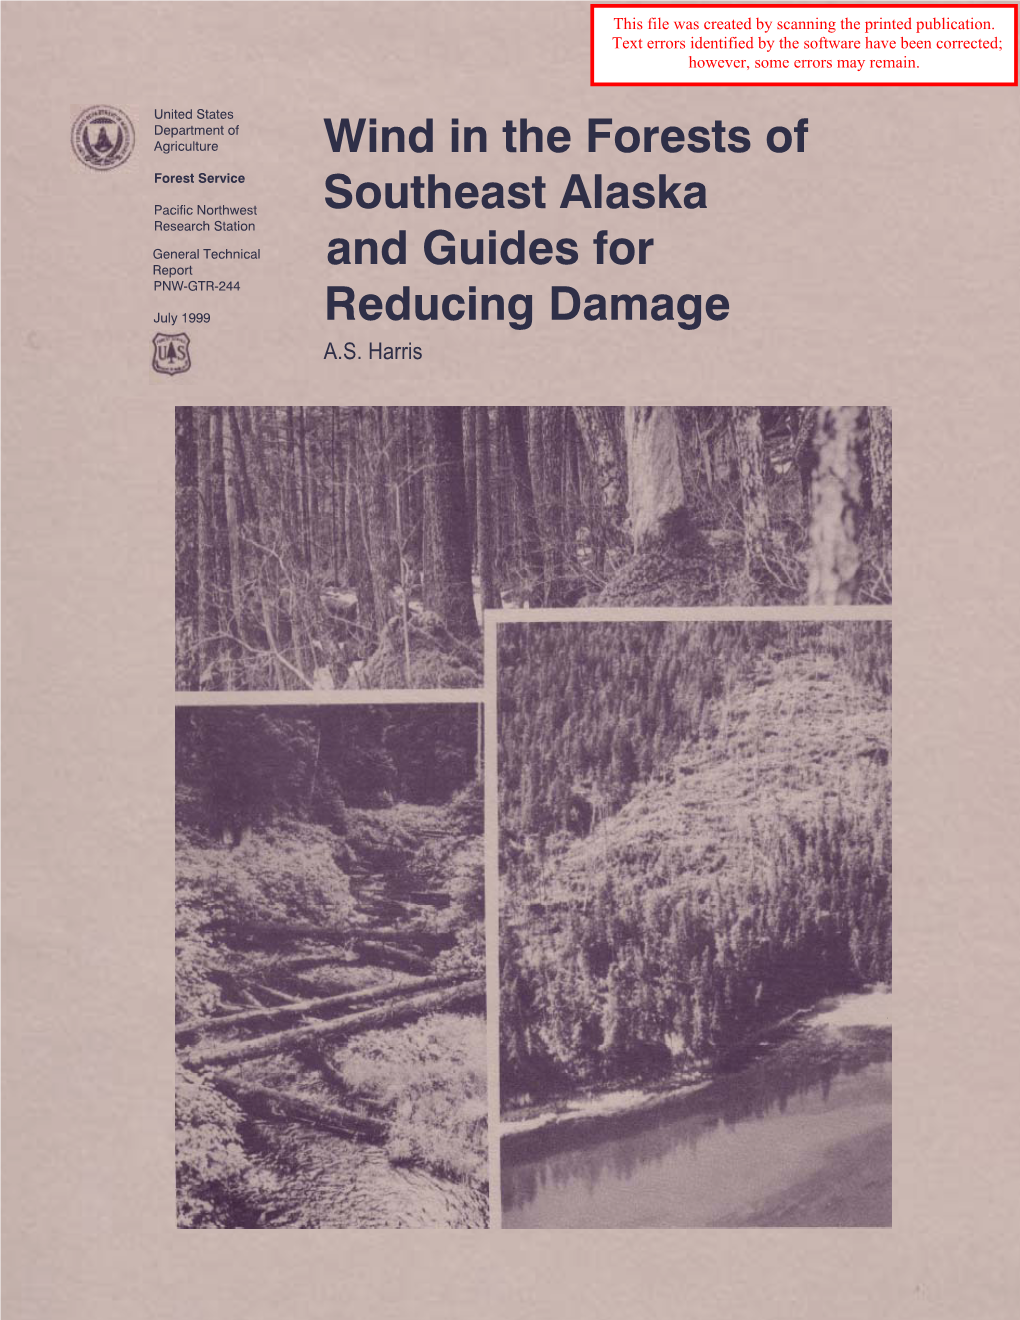 Wind in the Forests of Southeast Alaska and Guides for Reducing Damage